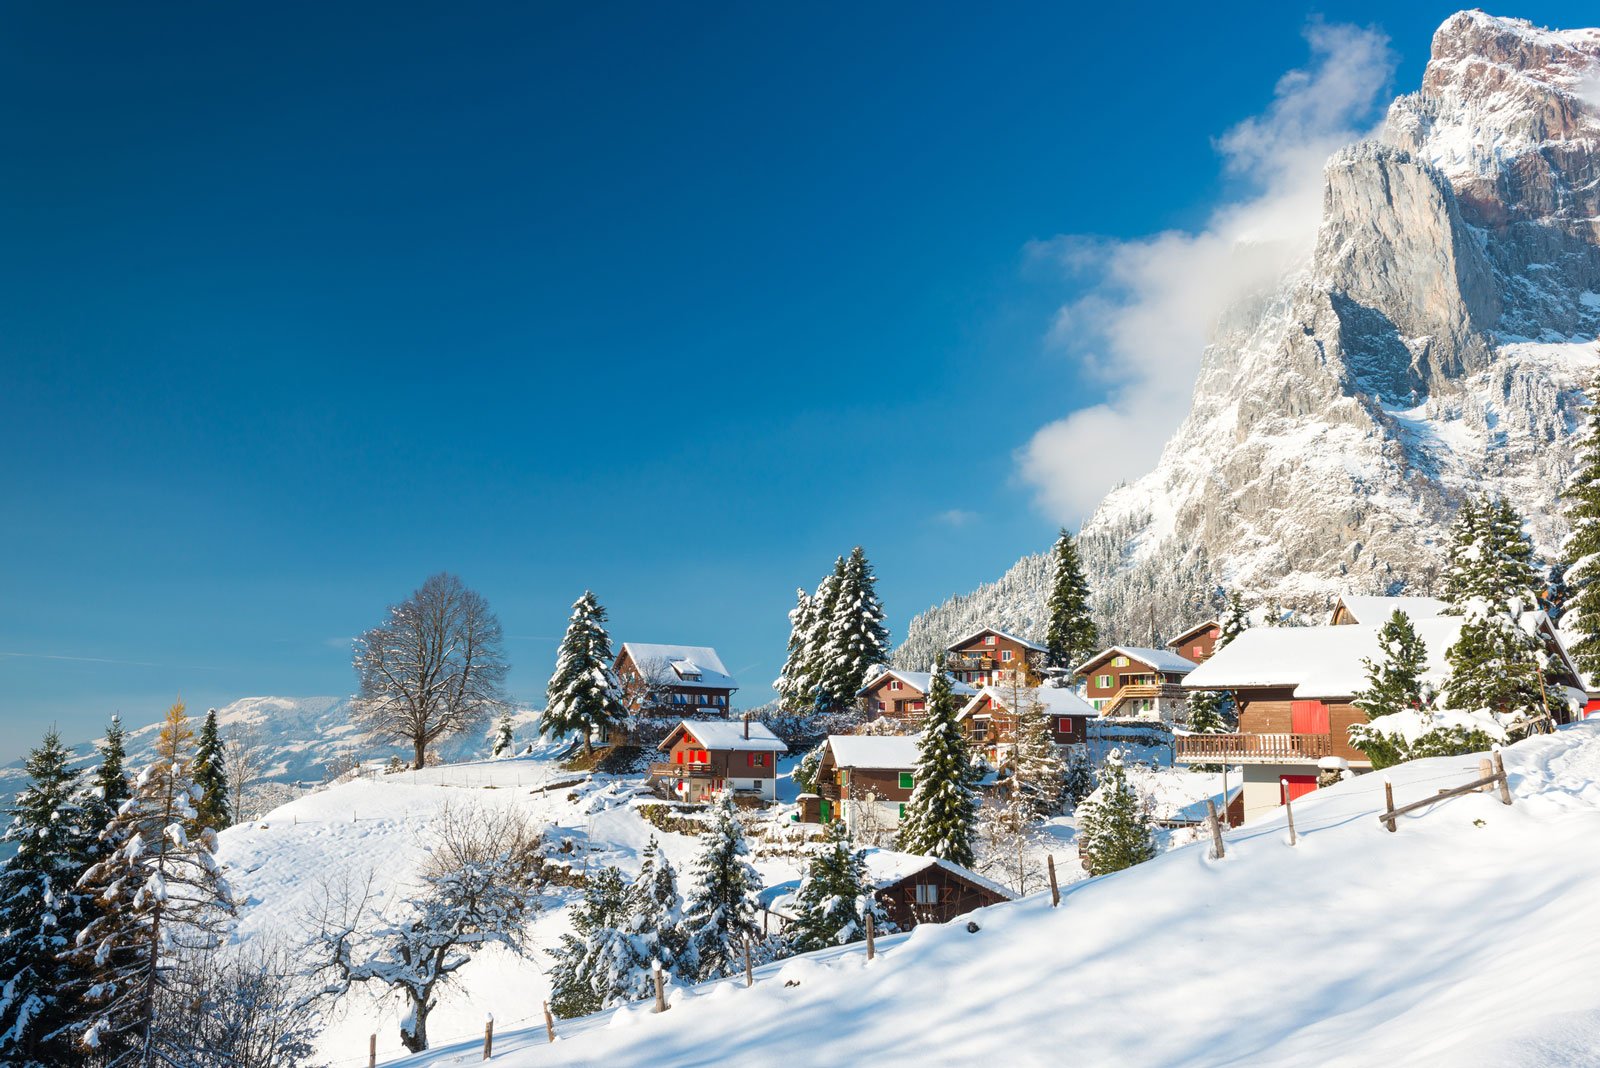 A hilltop town and mountain with a thick covering of snow - the best places to visit in February